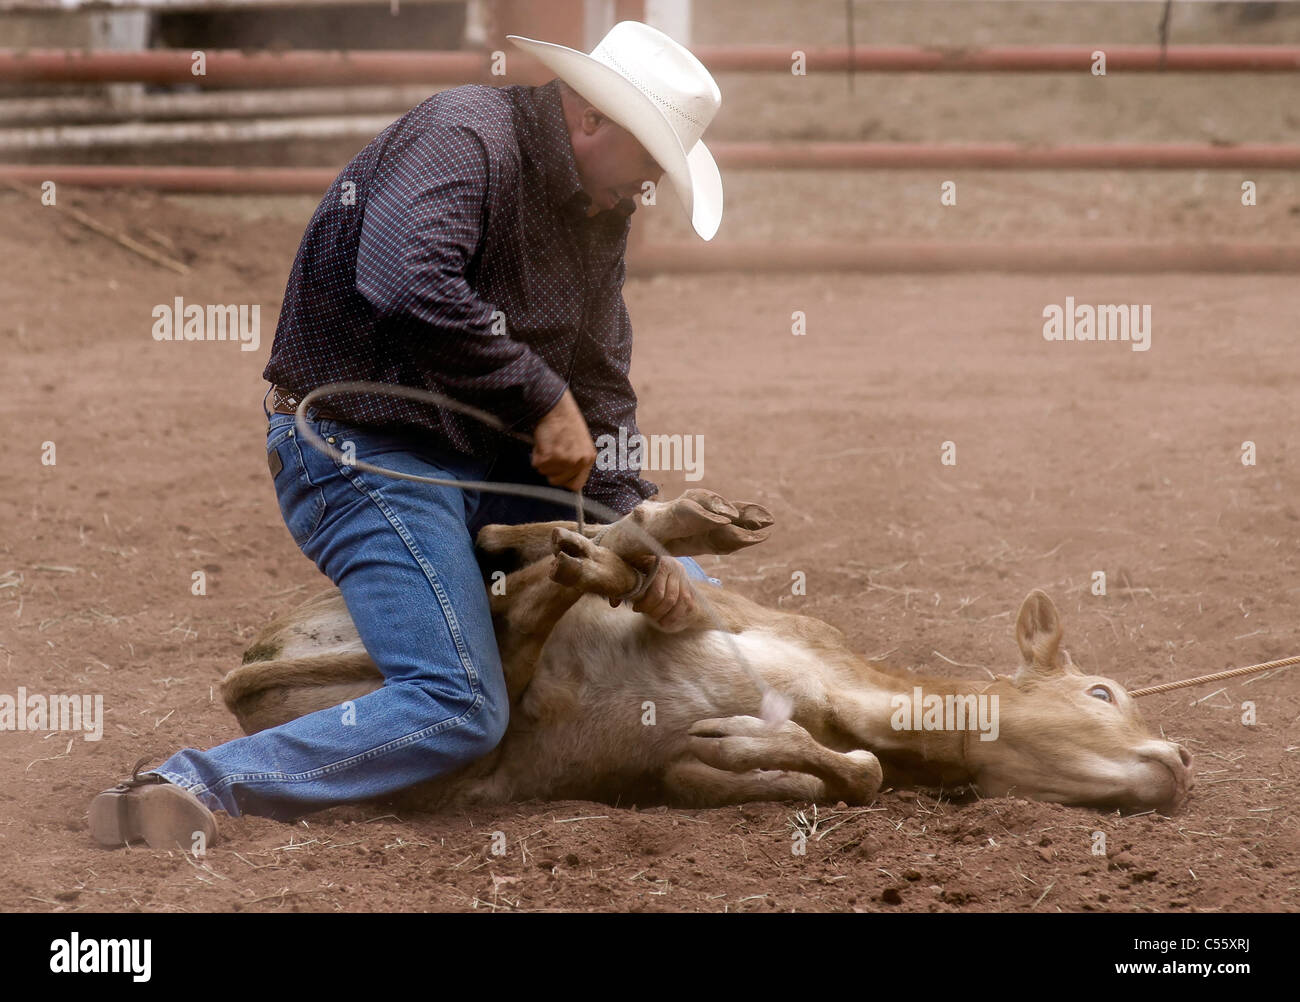 Competitor tying a calf during the calf roping event at the Annual Indian Rodeo held in Mescalero, New Mexico. Stock Photo